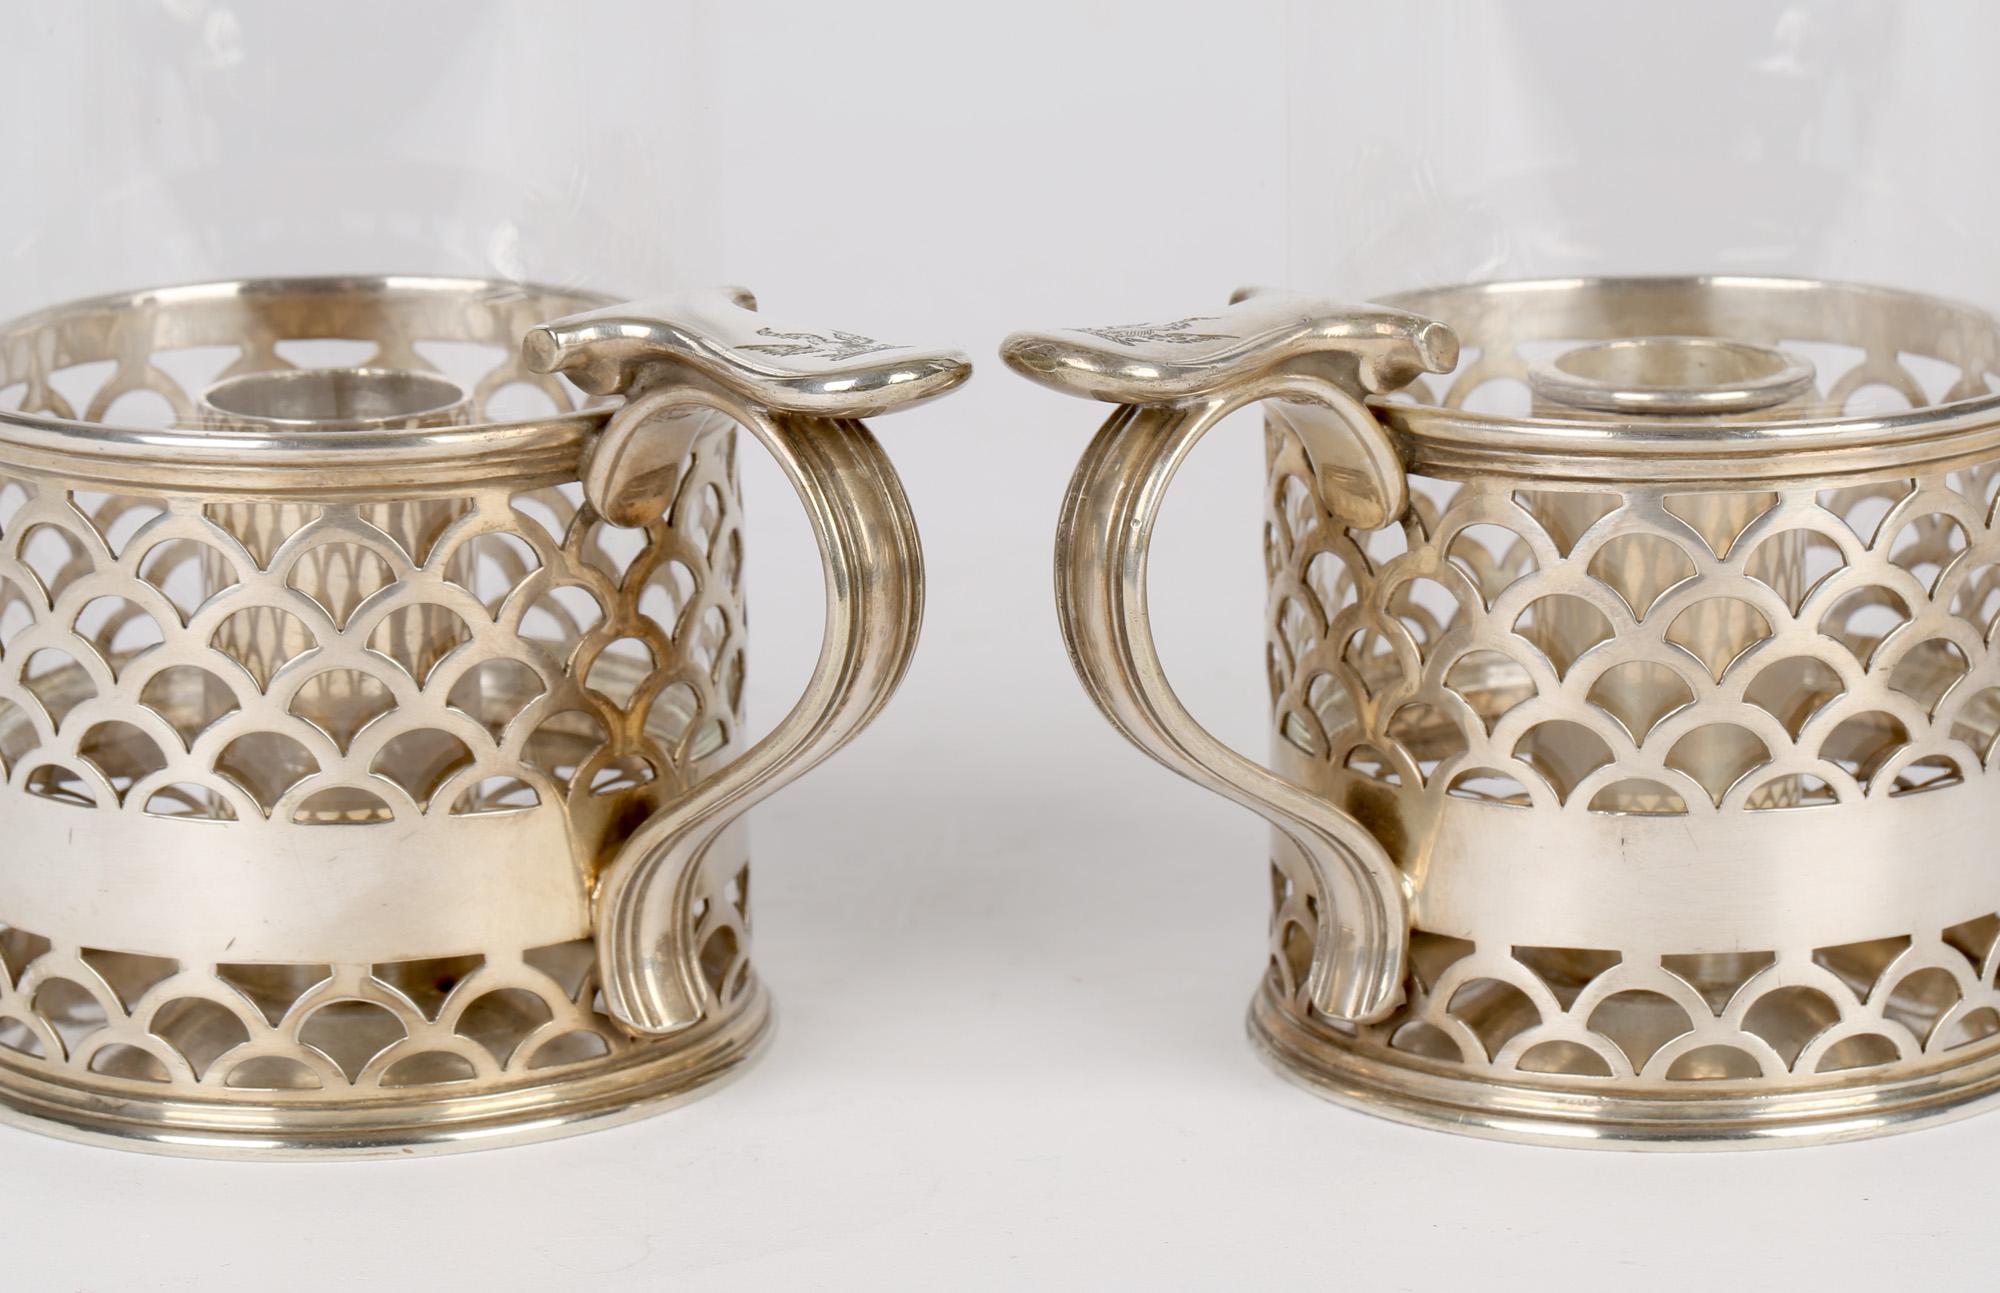 An exceptional quality pair antique Elkington & Co silver plated crested and glass storm lamp lanterns dated 1888. The lamps have a heavily made base with a carrying handle with a flat topped thumb rest each engraved with a crest showing an eagle on